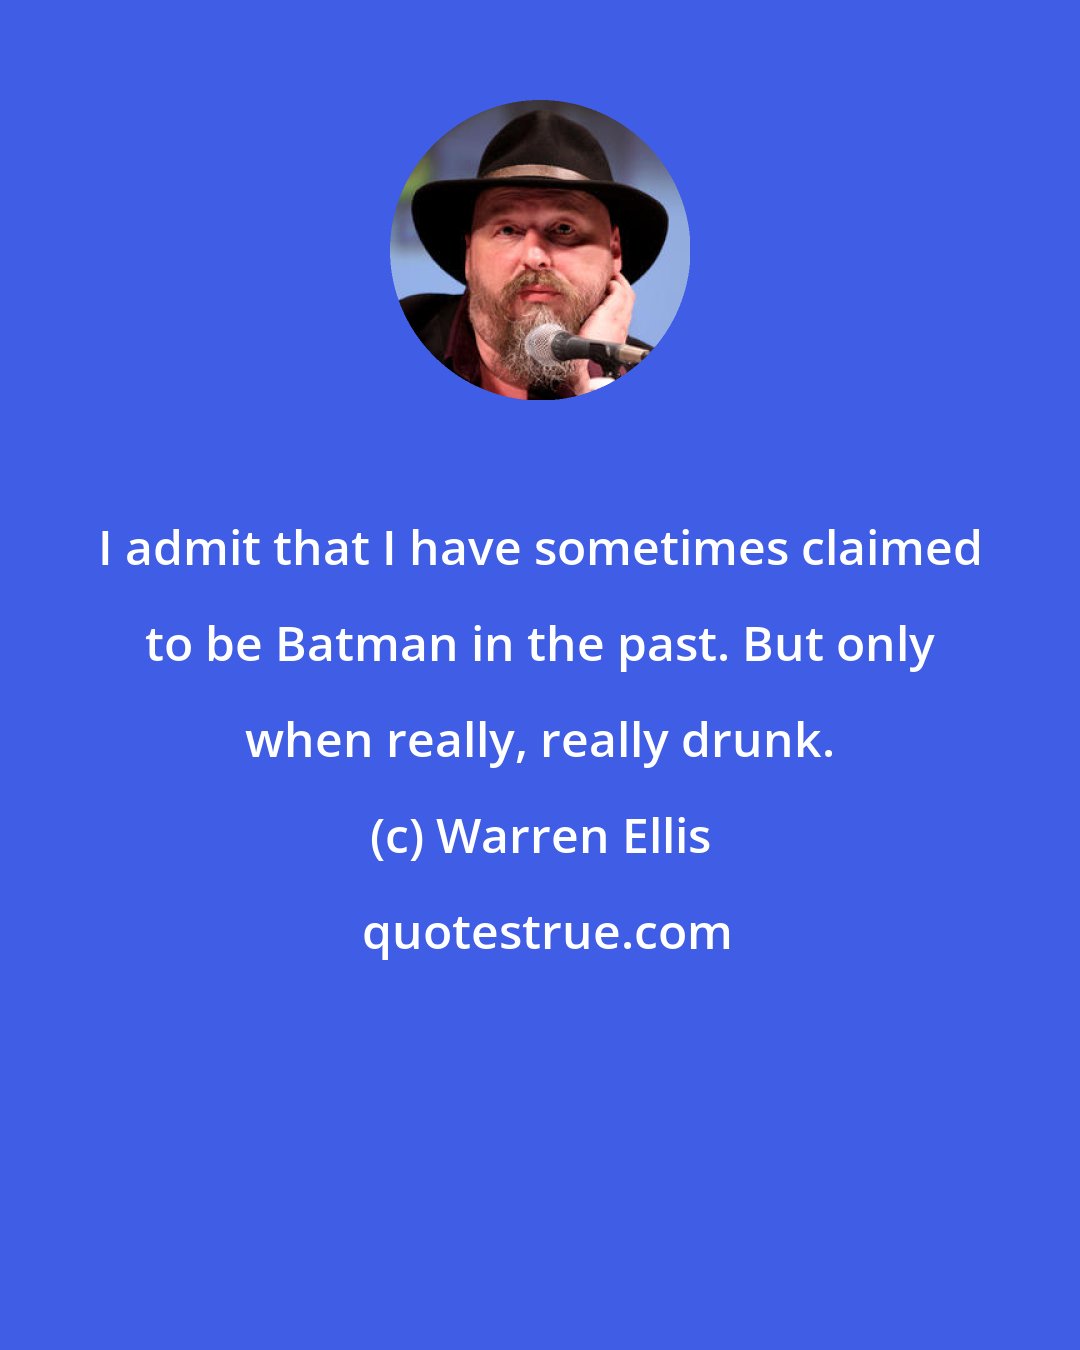 Warren Ellis: I admit that I have sometimes claimed to be Batman in the past. But only when really, really drunk.